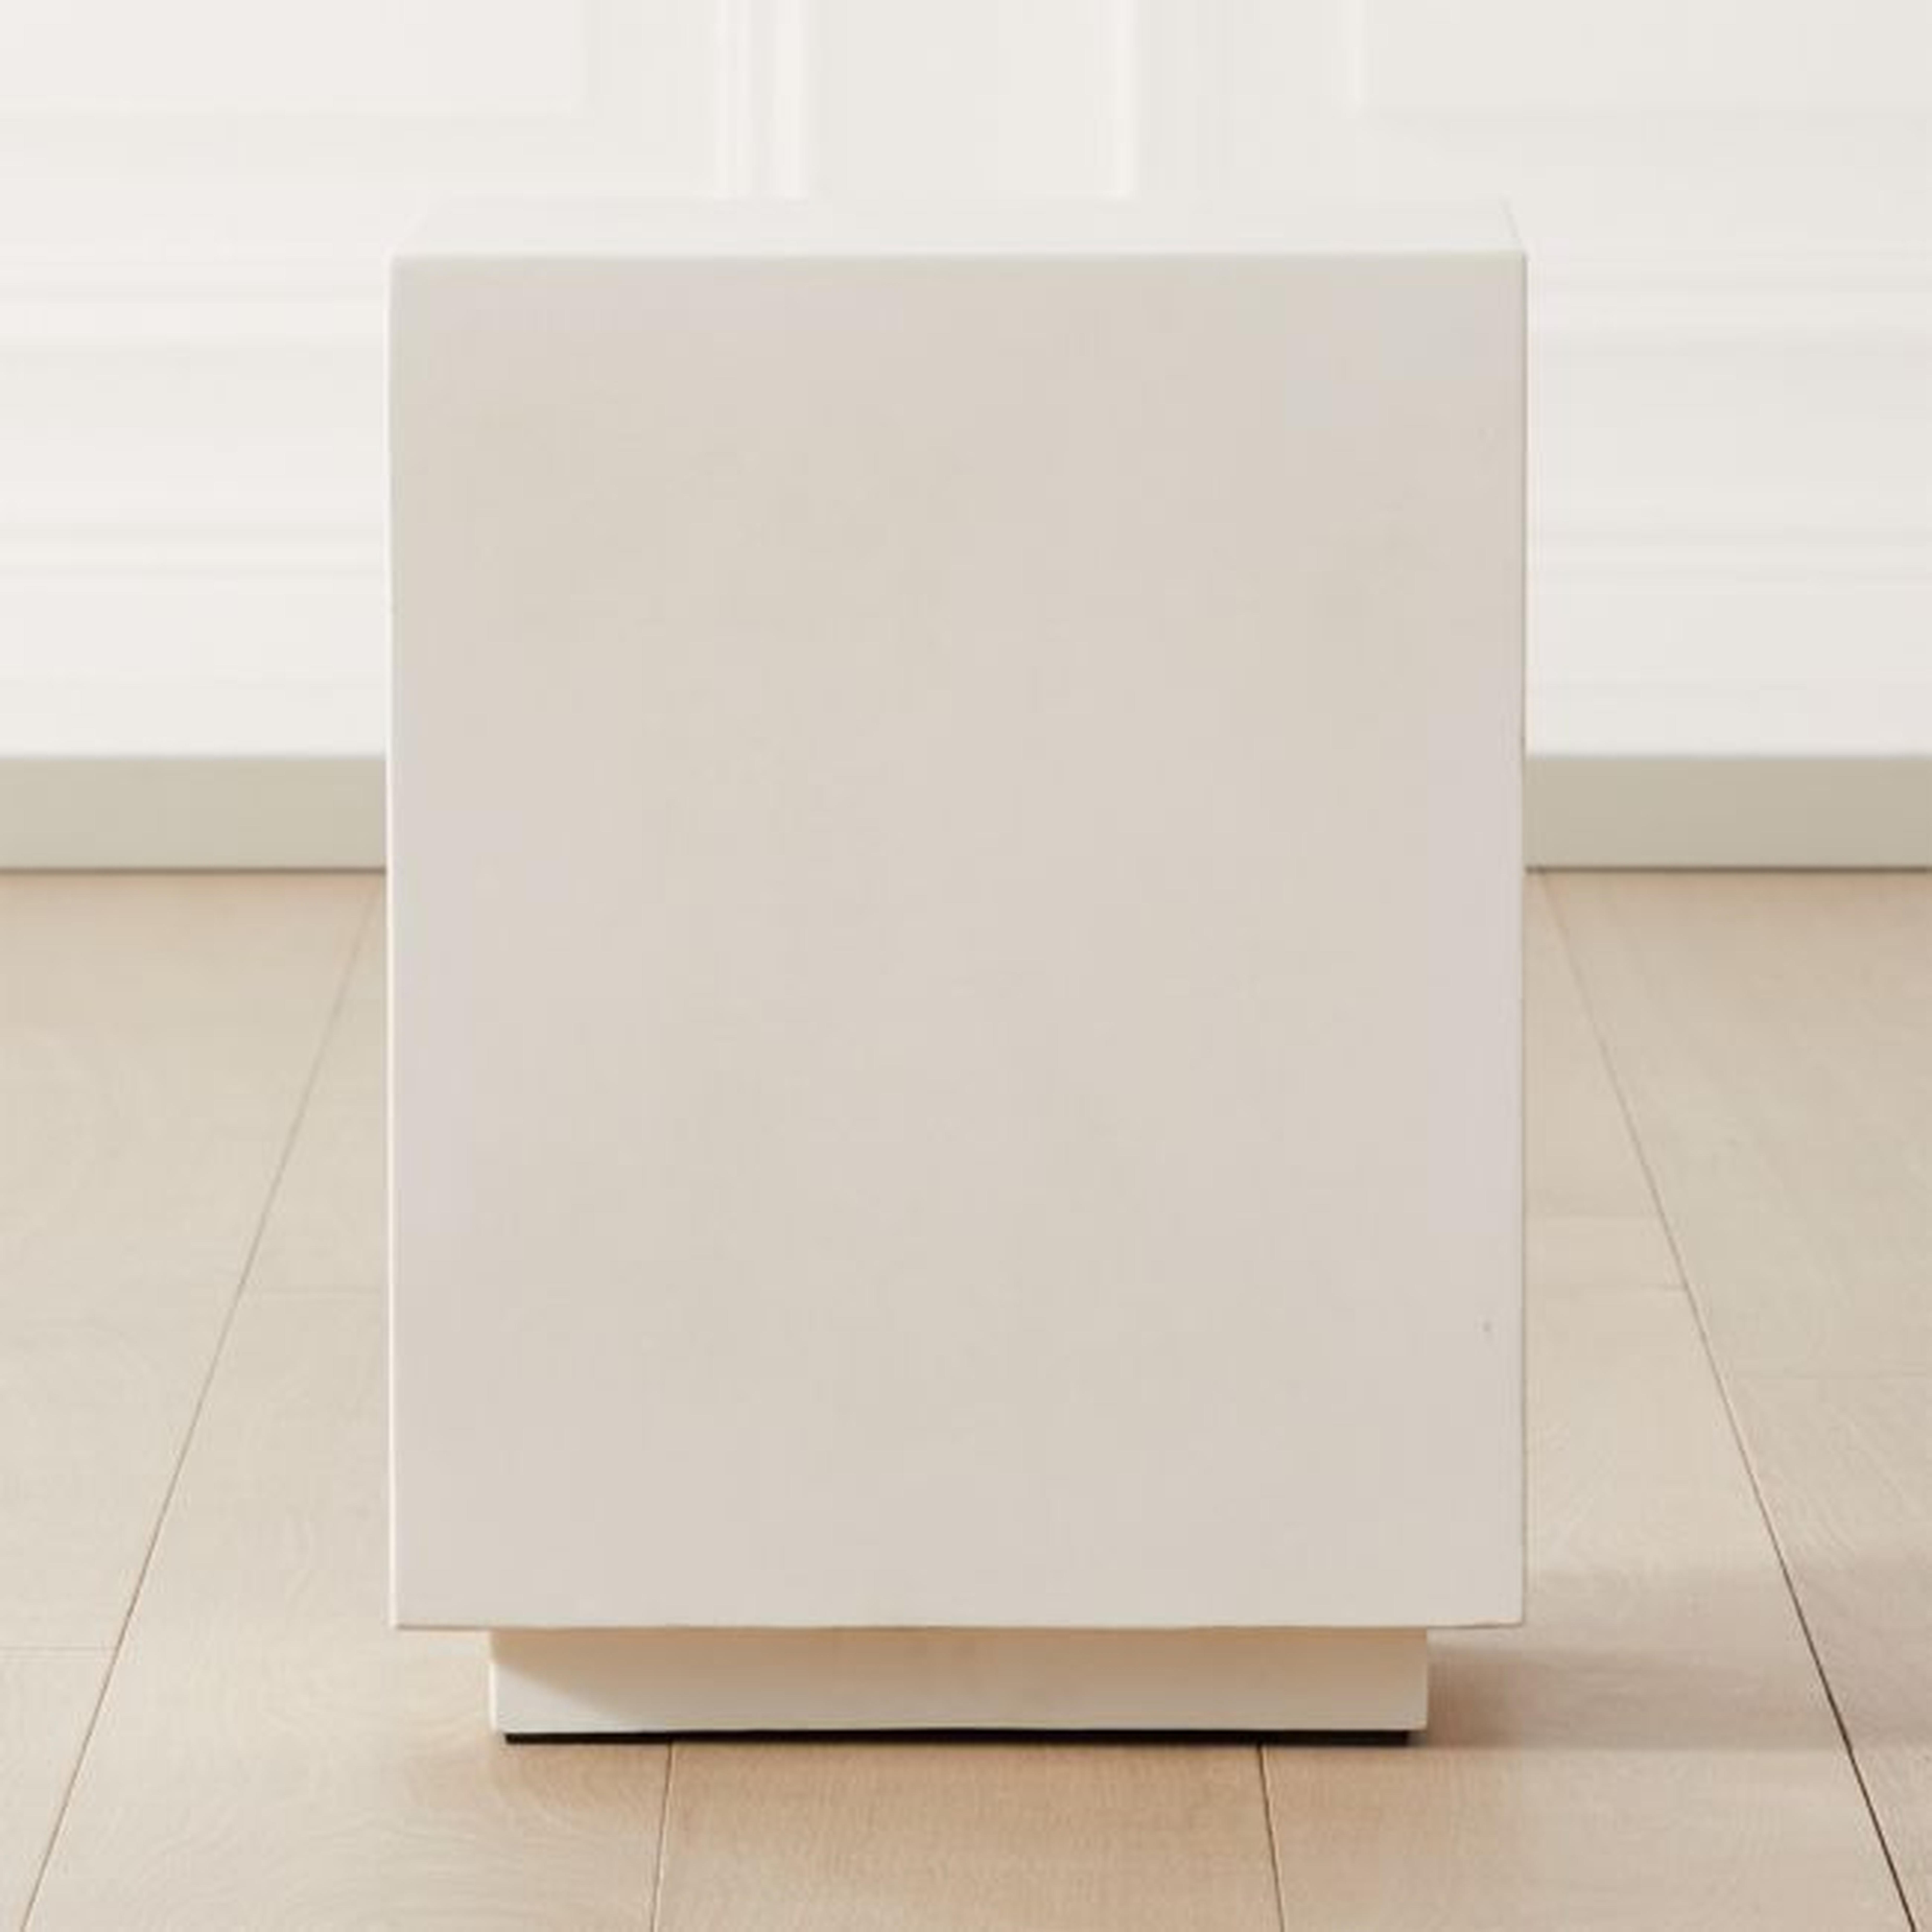 Matter Ivory Cement Square Side Table - CB2